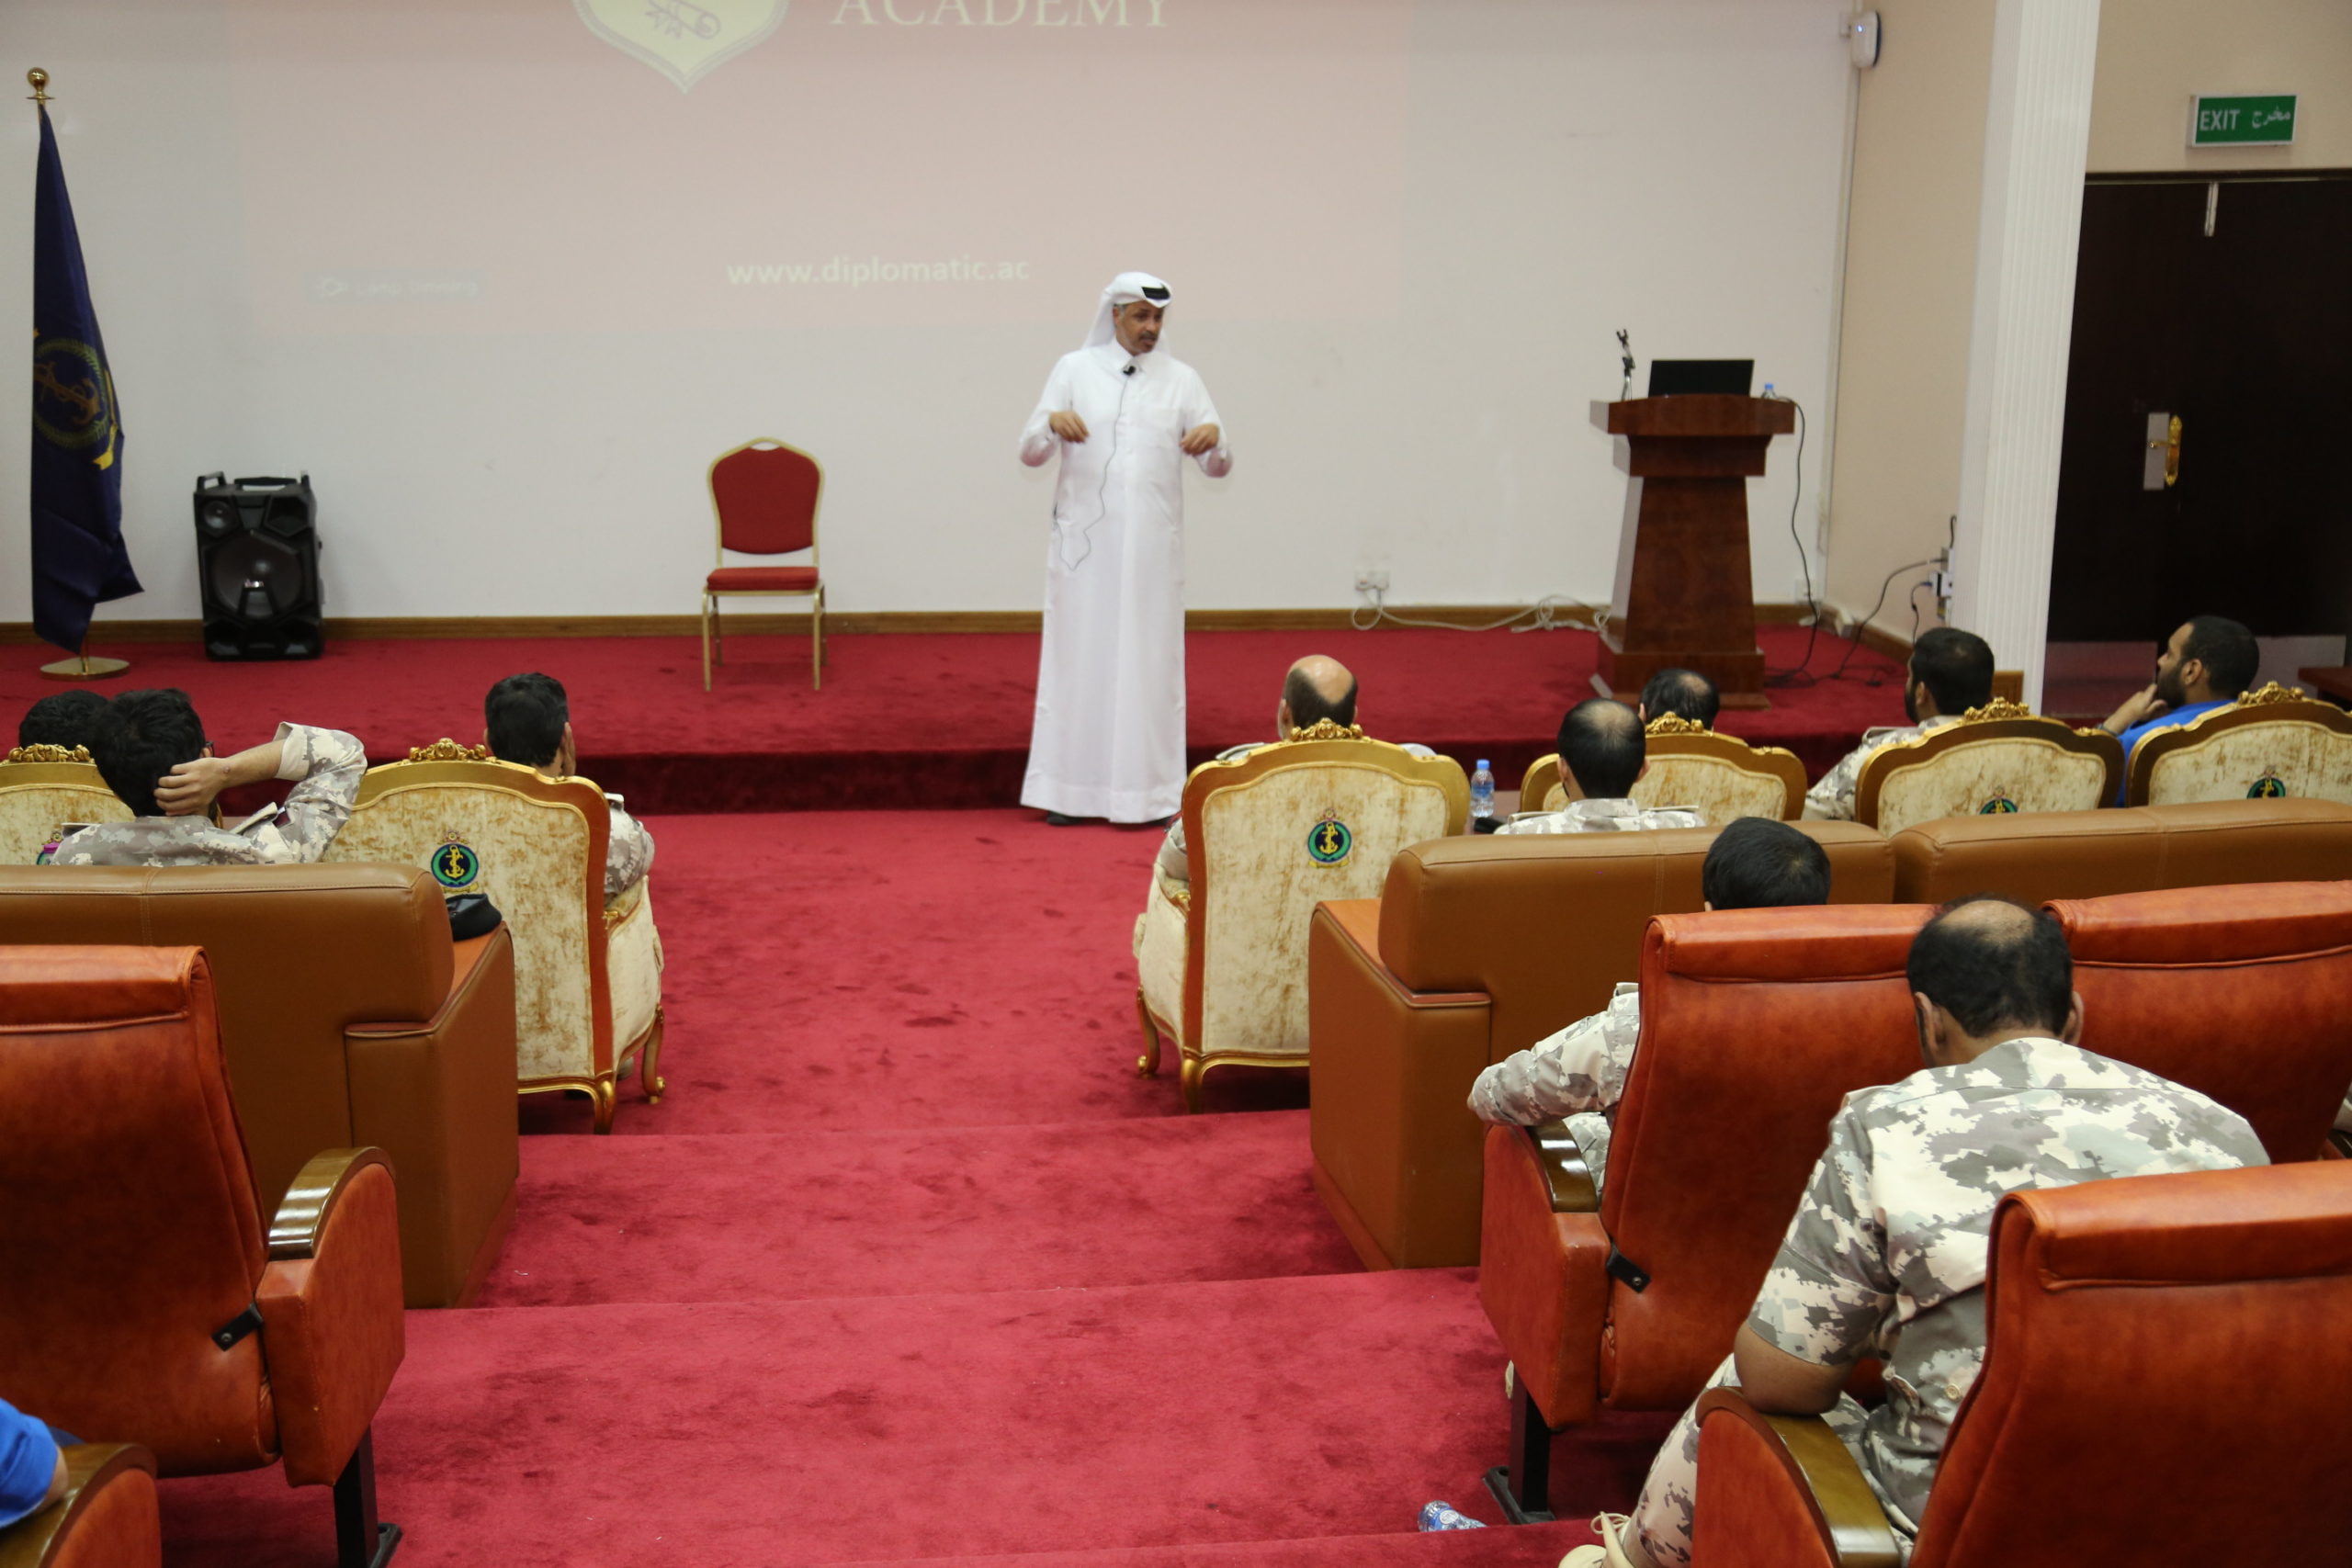 The Etiquette and international protocol for Accompanying Official Delegates course was concluded from 1 to 5 March 2020